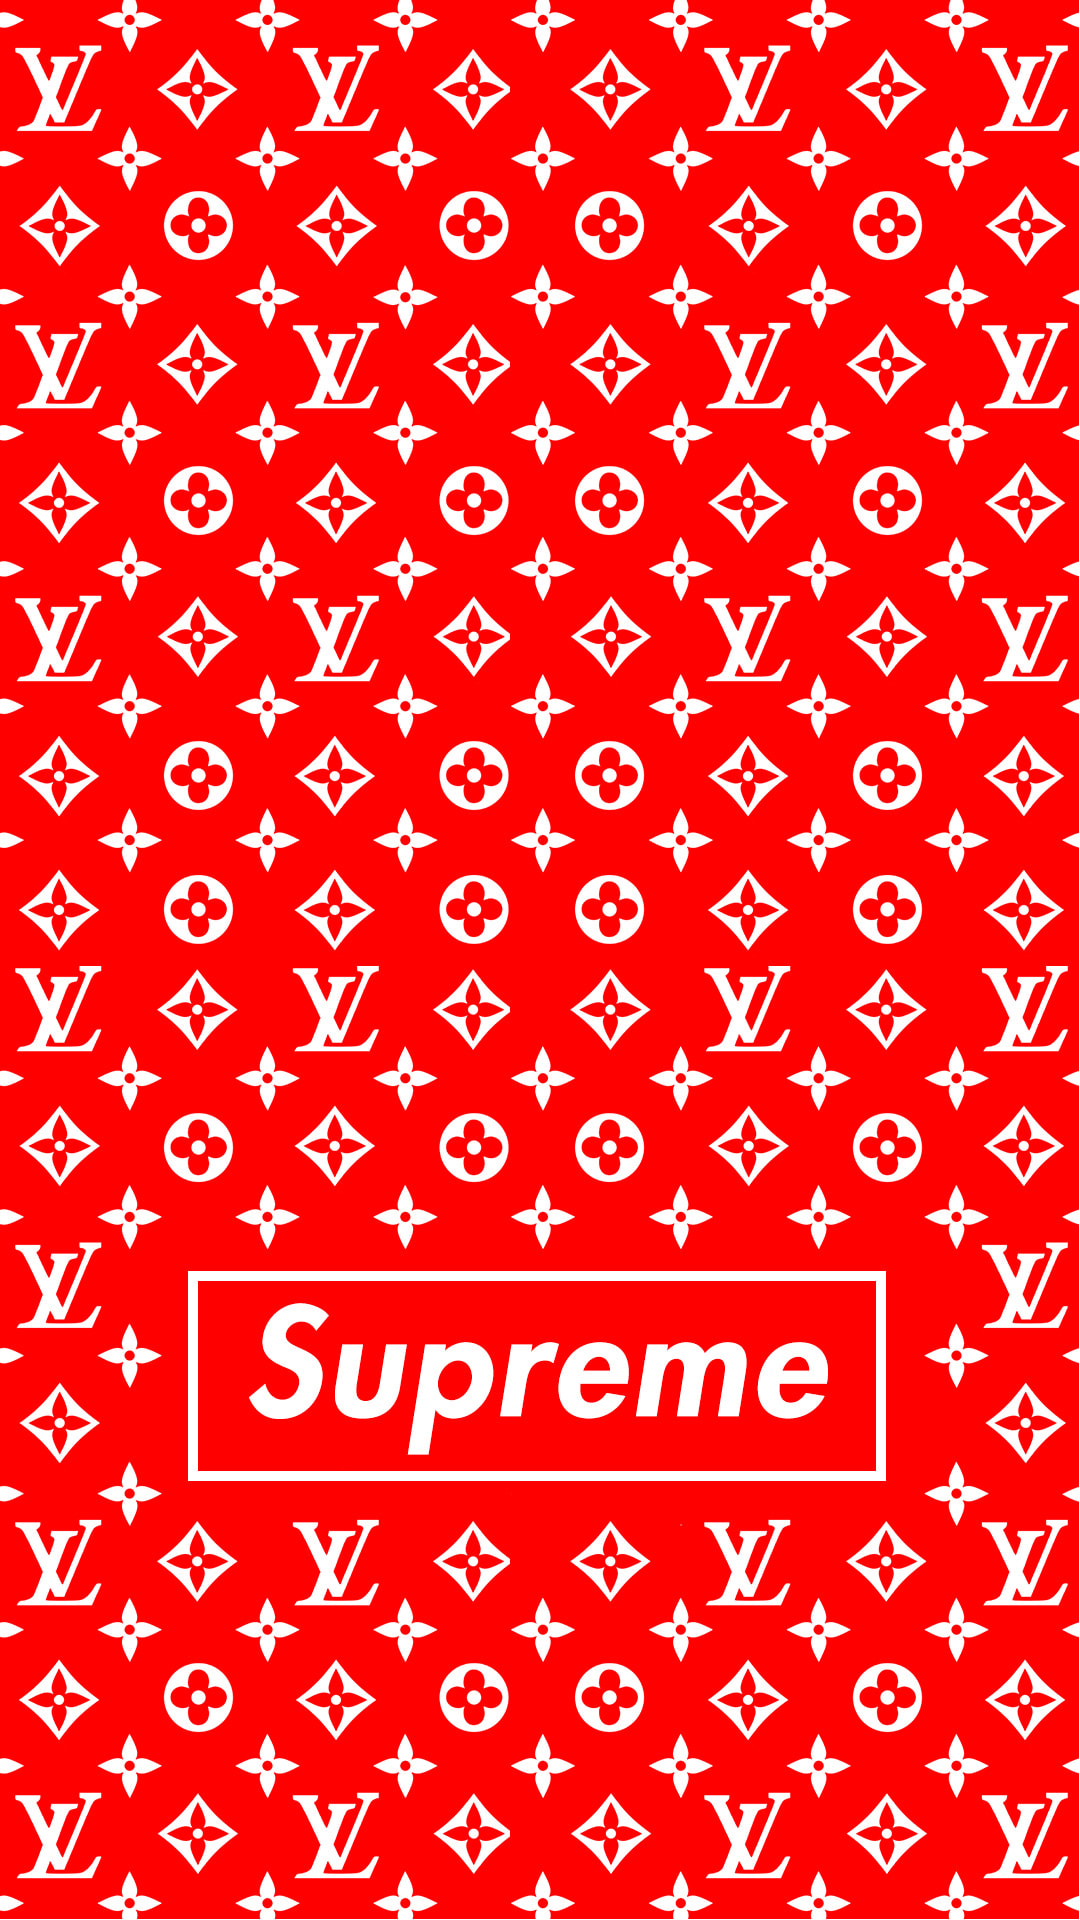 Supreme X Lv Iphone Wallpaper English As A Second Language At Rice University